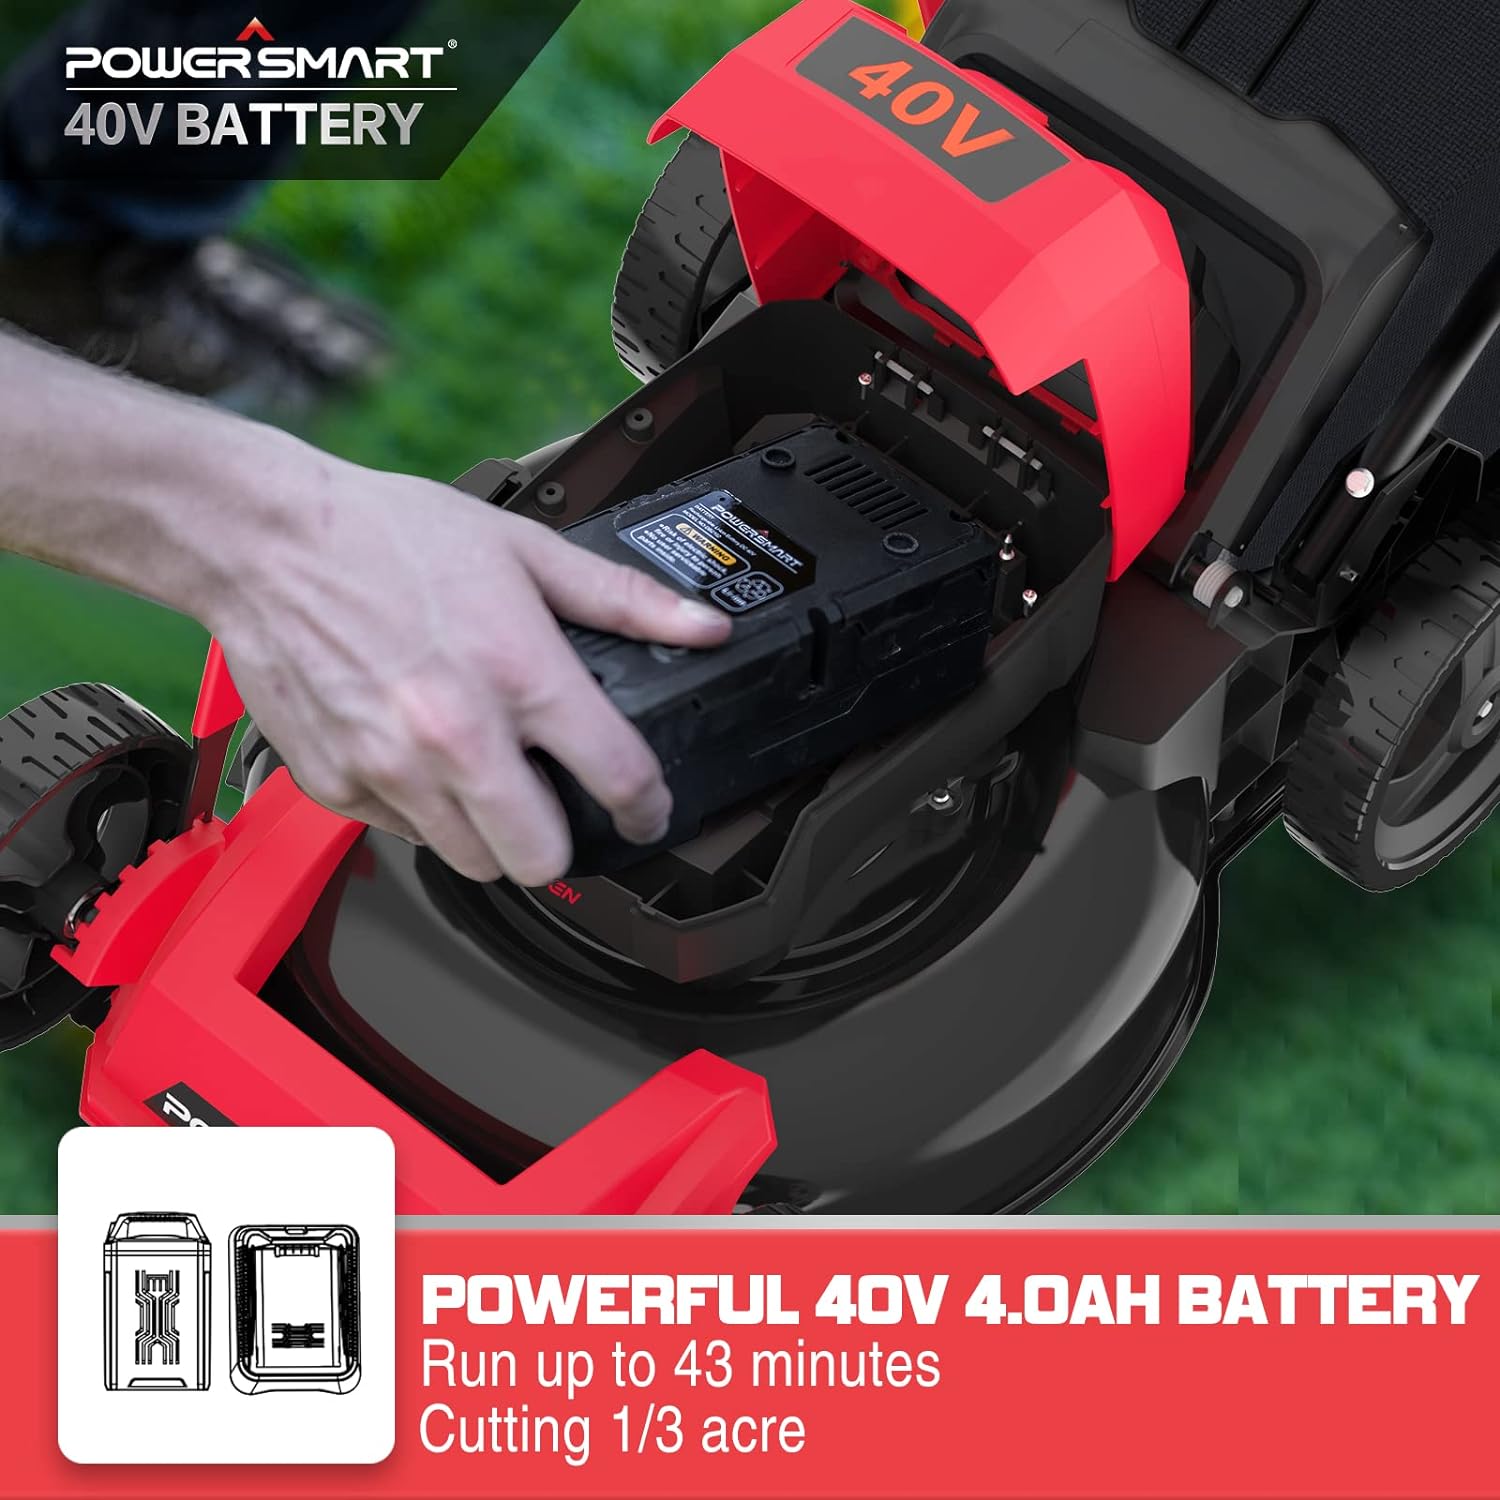 PowerSmart 40V MAX Cordless Lawn Mower Battery Powered with Bag (Lightly Used) - $150